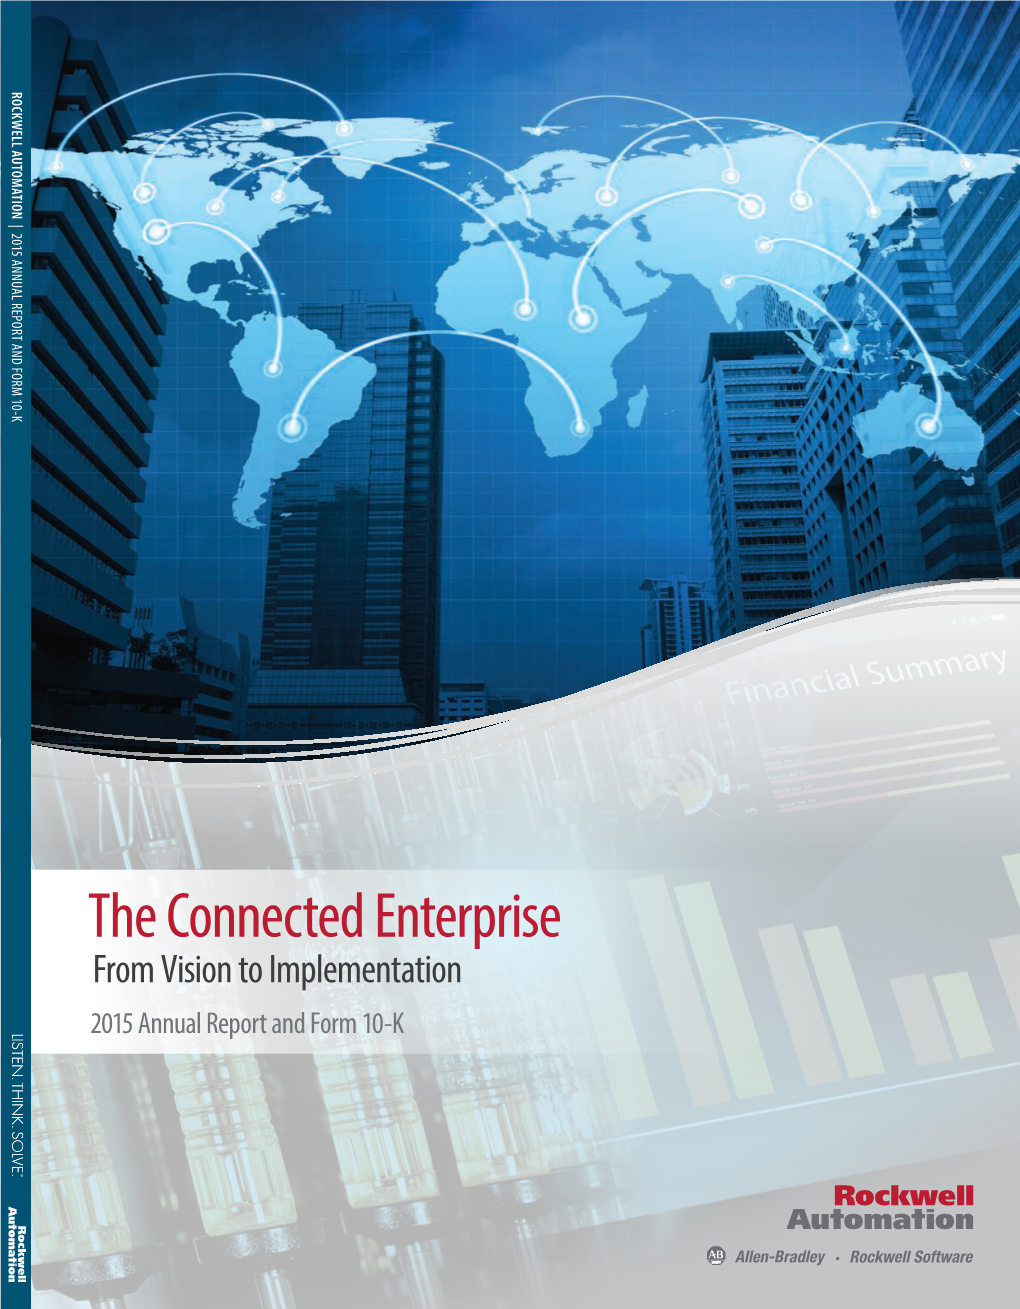 The Connected Enterprise from Vision to Implementation 2015 Annual Report and Form 10-K 2015 Financial Highlights